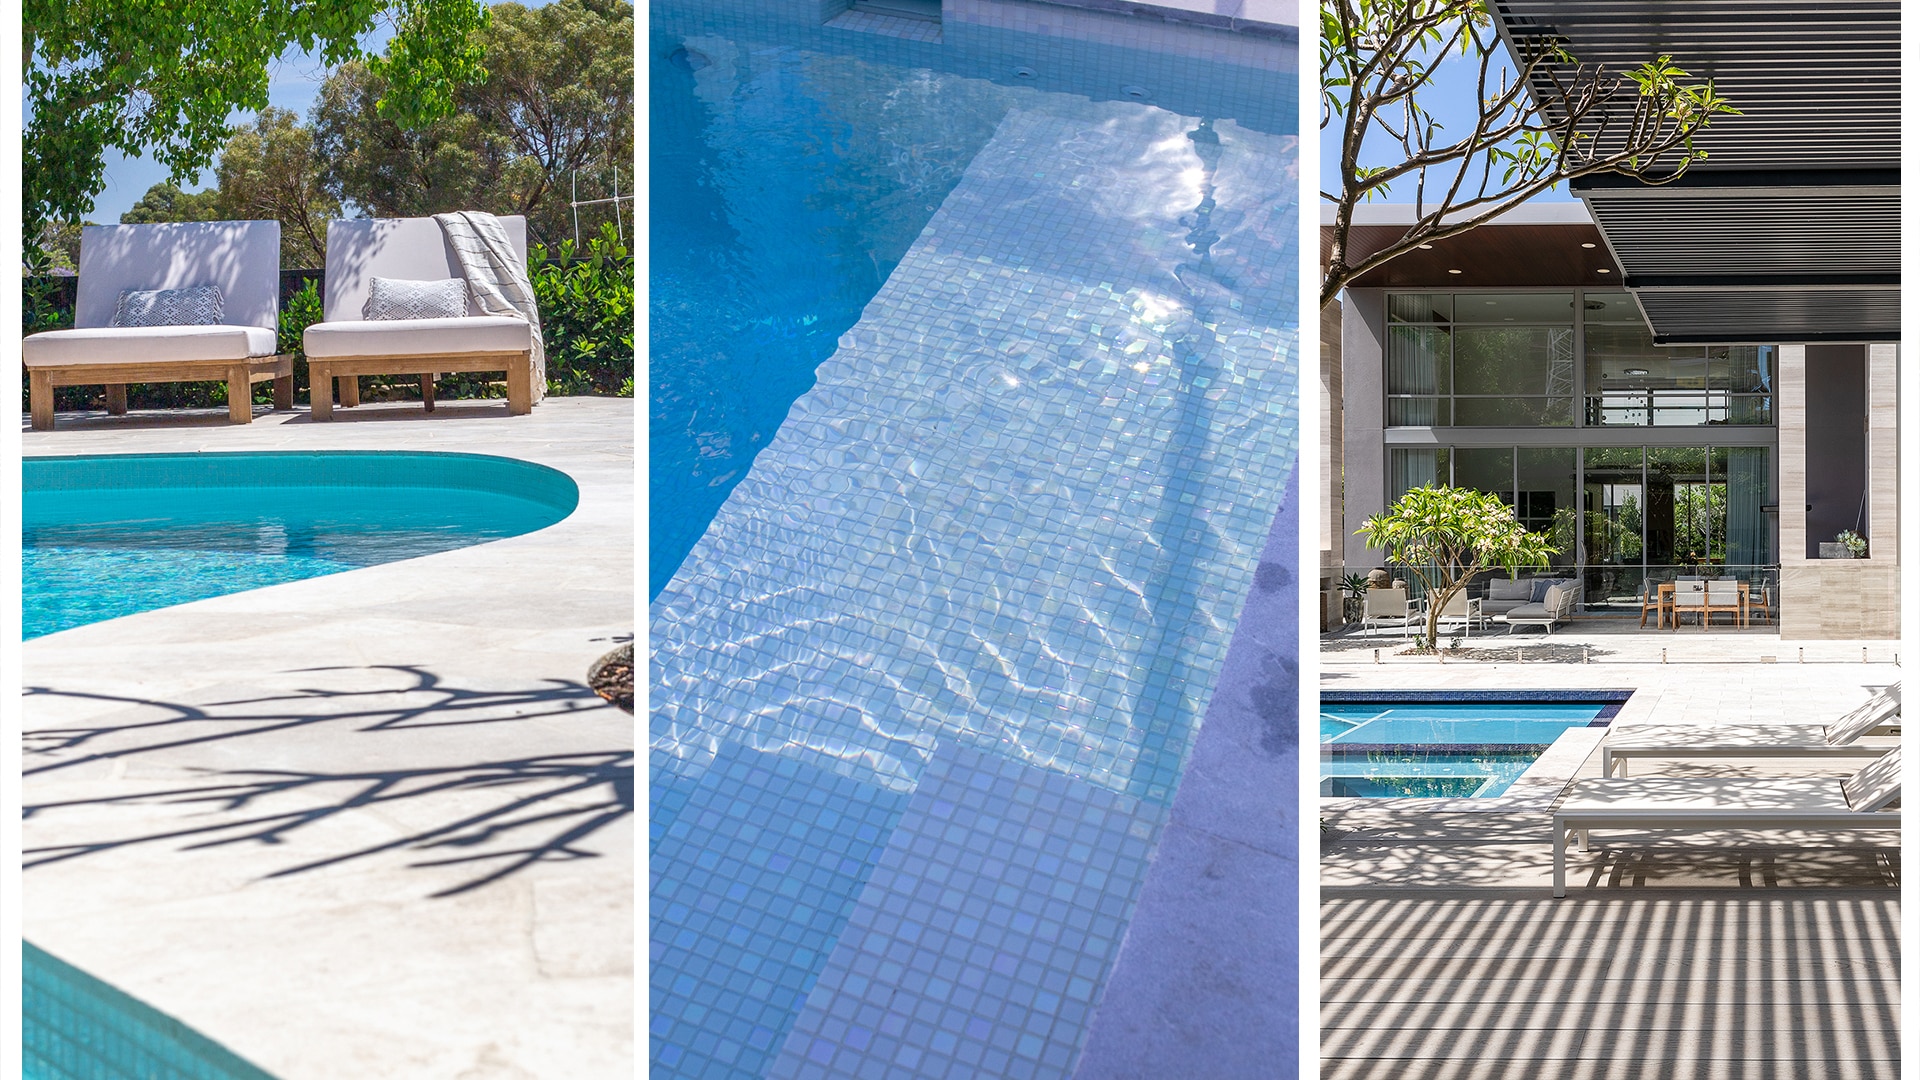 High quality TDL surface finishes, crazy paving, fully tiled pool, and millboard decking.